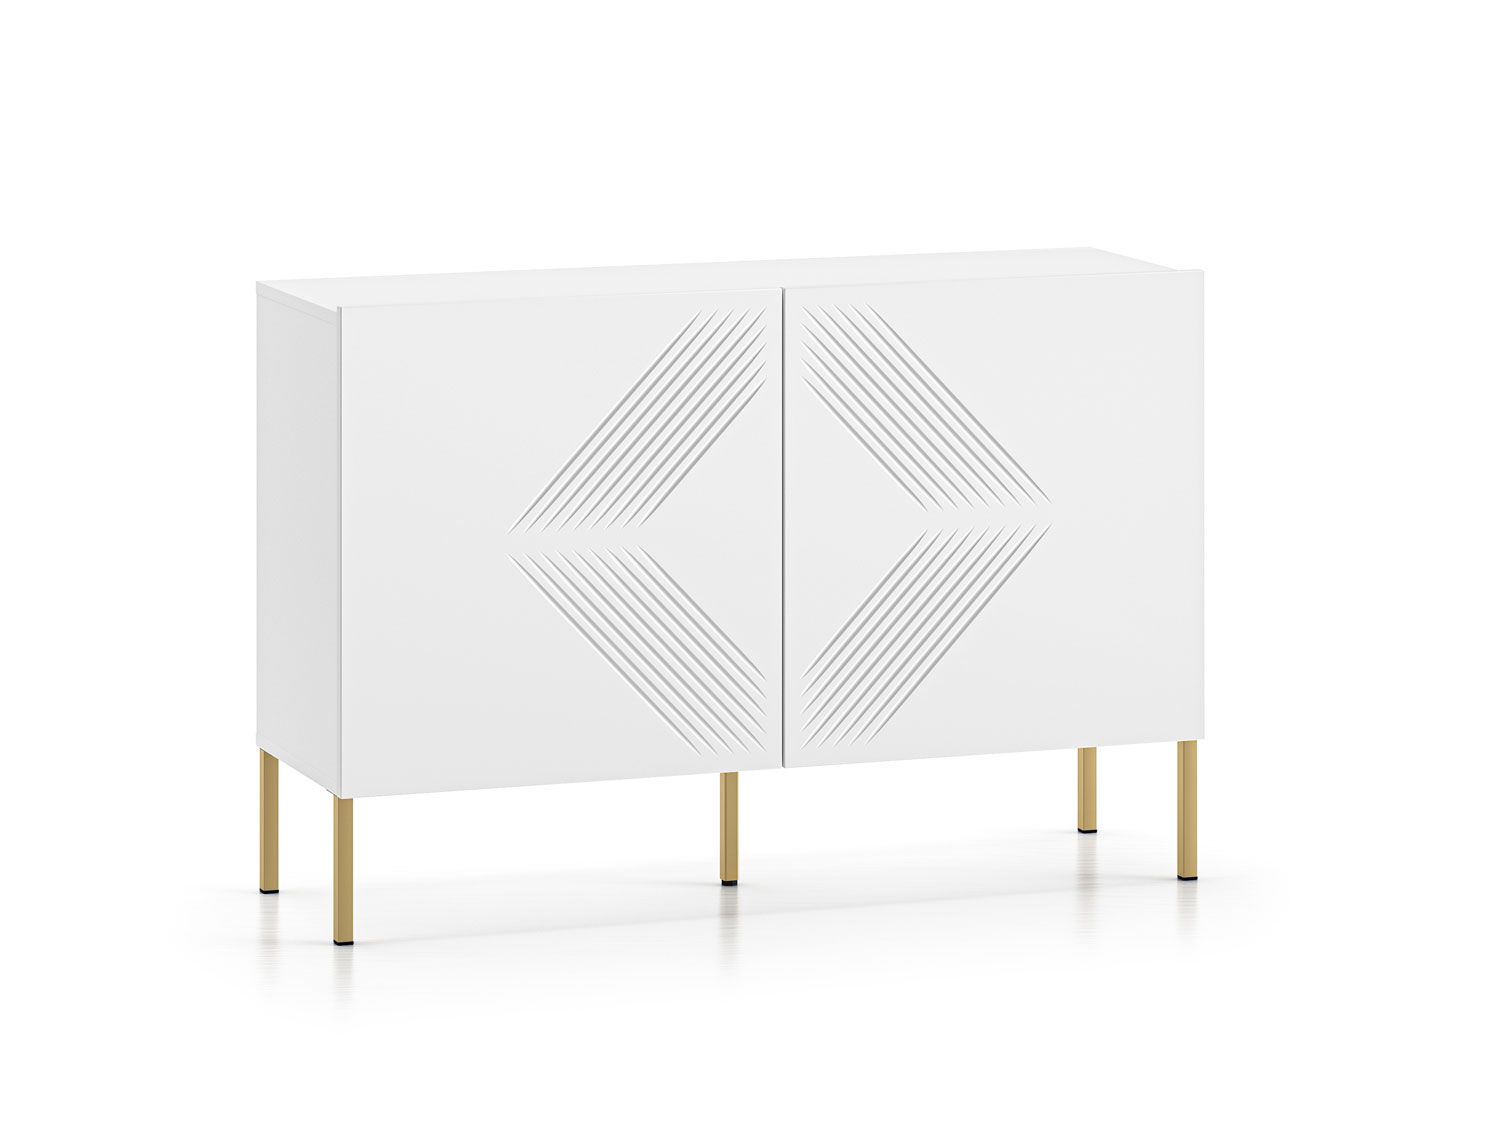 Chest of drawers with sufficient storage space Taos 10, color: white matt, ideal for combining, legs: gold, dimensions: 77 x 114 x 37 cm, with two doors and four compartments